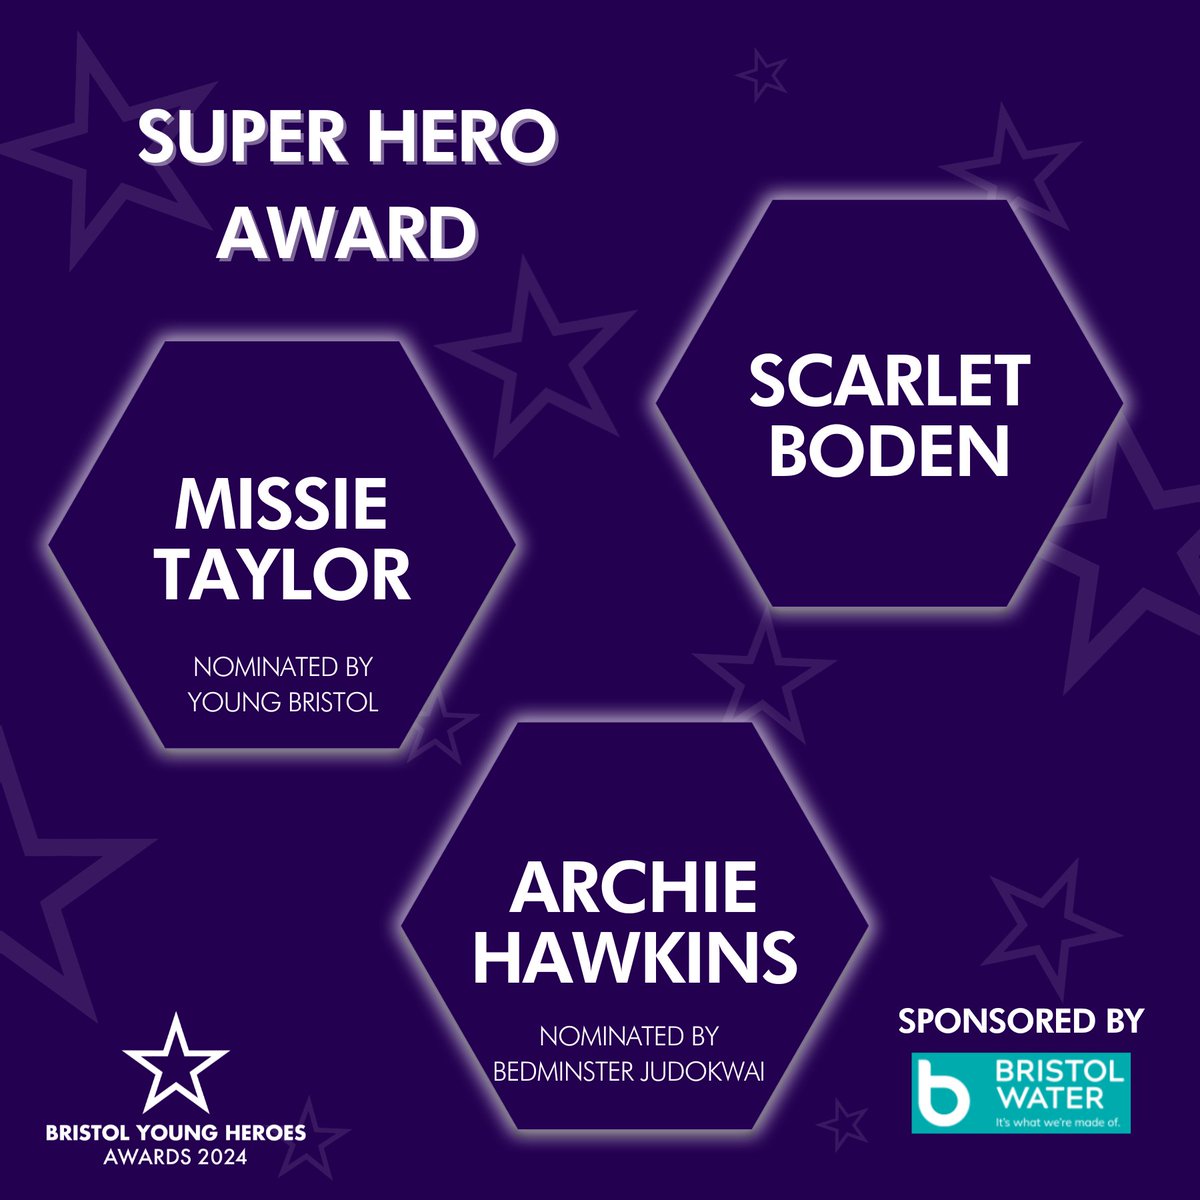 ✨Super Hero Award✨ We are thrilled to announce the finalists for the Super Hero Award are: 🌟 Missie Taylor 🌟 Scarlet Boden 🌟 Archie Hawkins Congratulations and we wish you all the best of luck 🤞 Thank you to @BristolWater for sponsoring the Super Hero Award 🙏